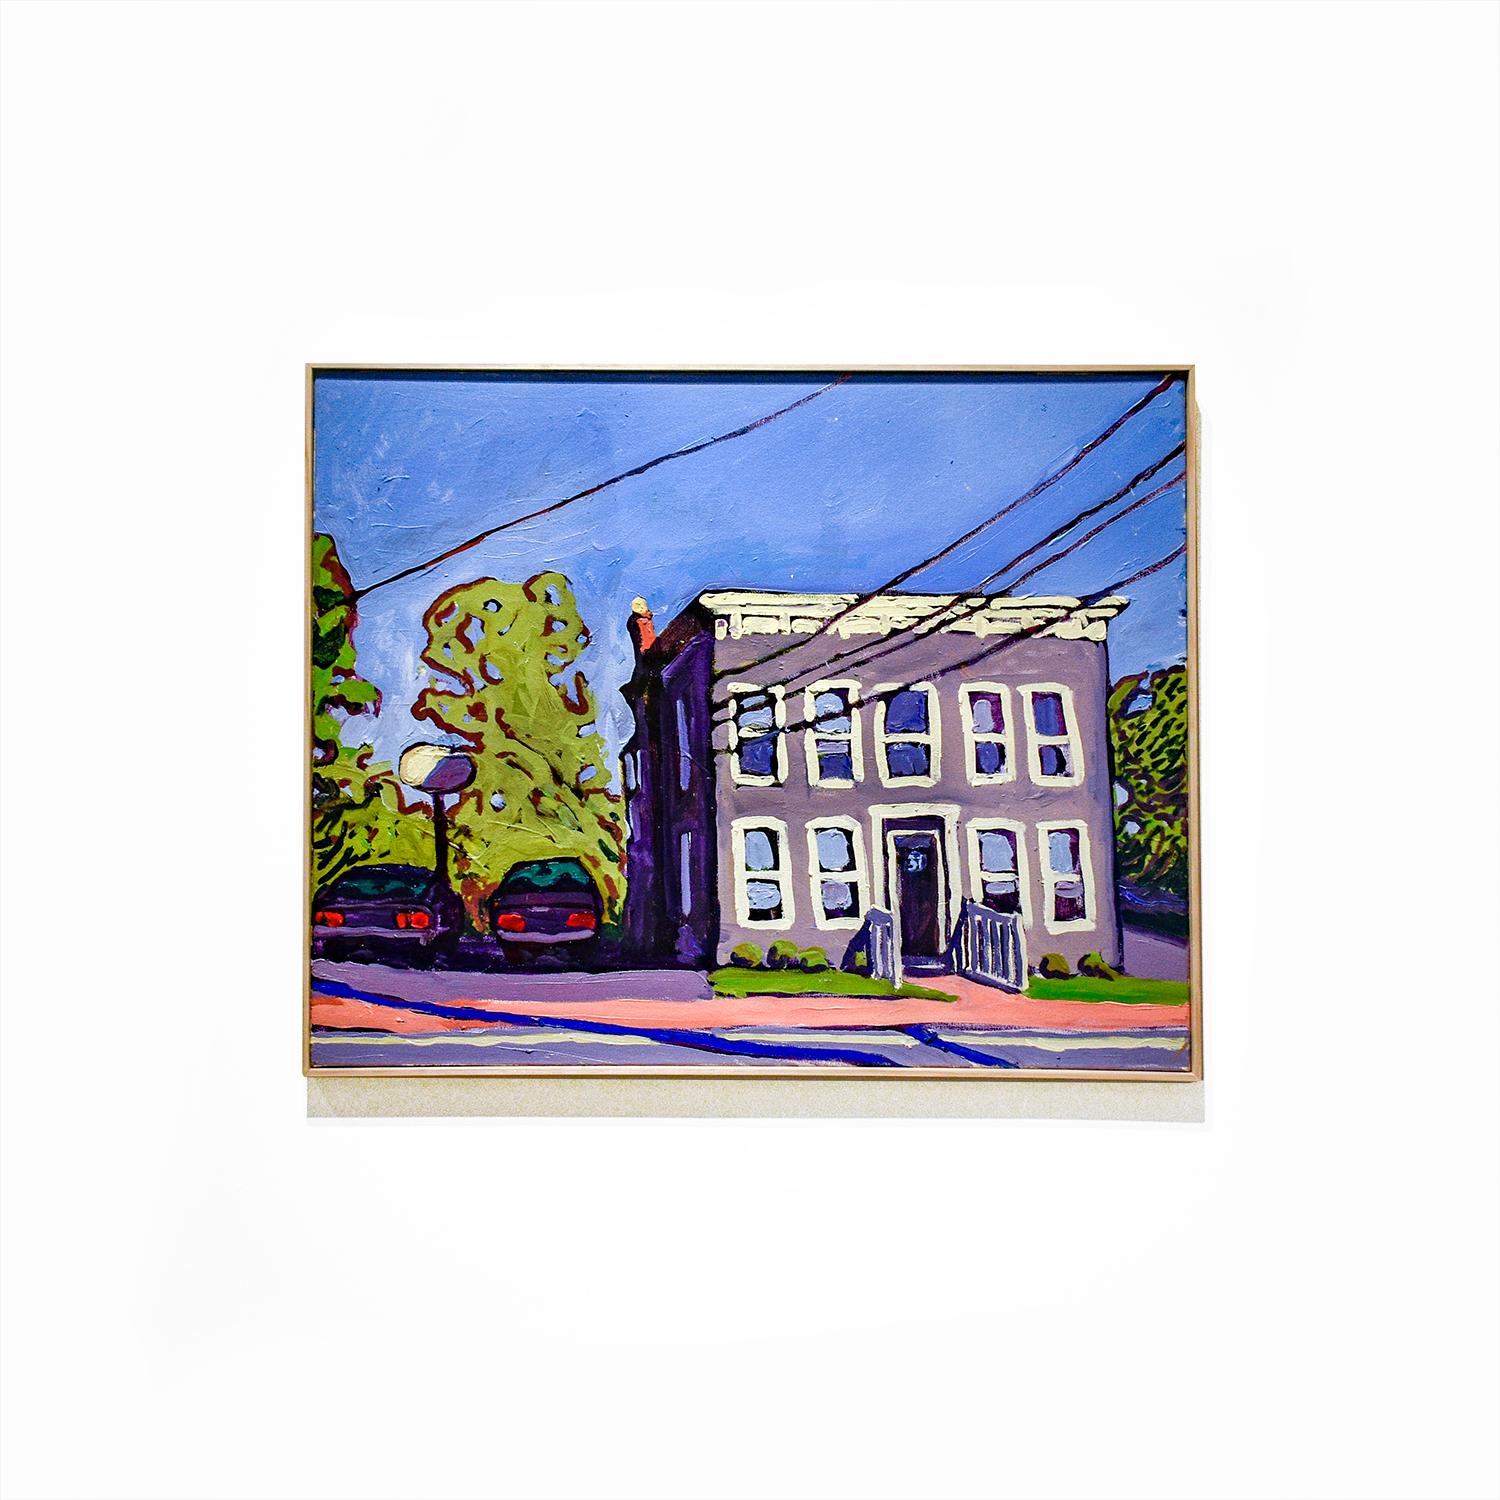 31 Washington Street (Contemporary Cityscape Painting of Building & Power Lines) - Gray Still-Life Painting by Dan Rupe